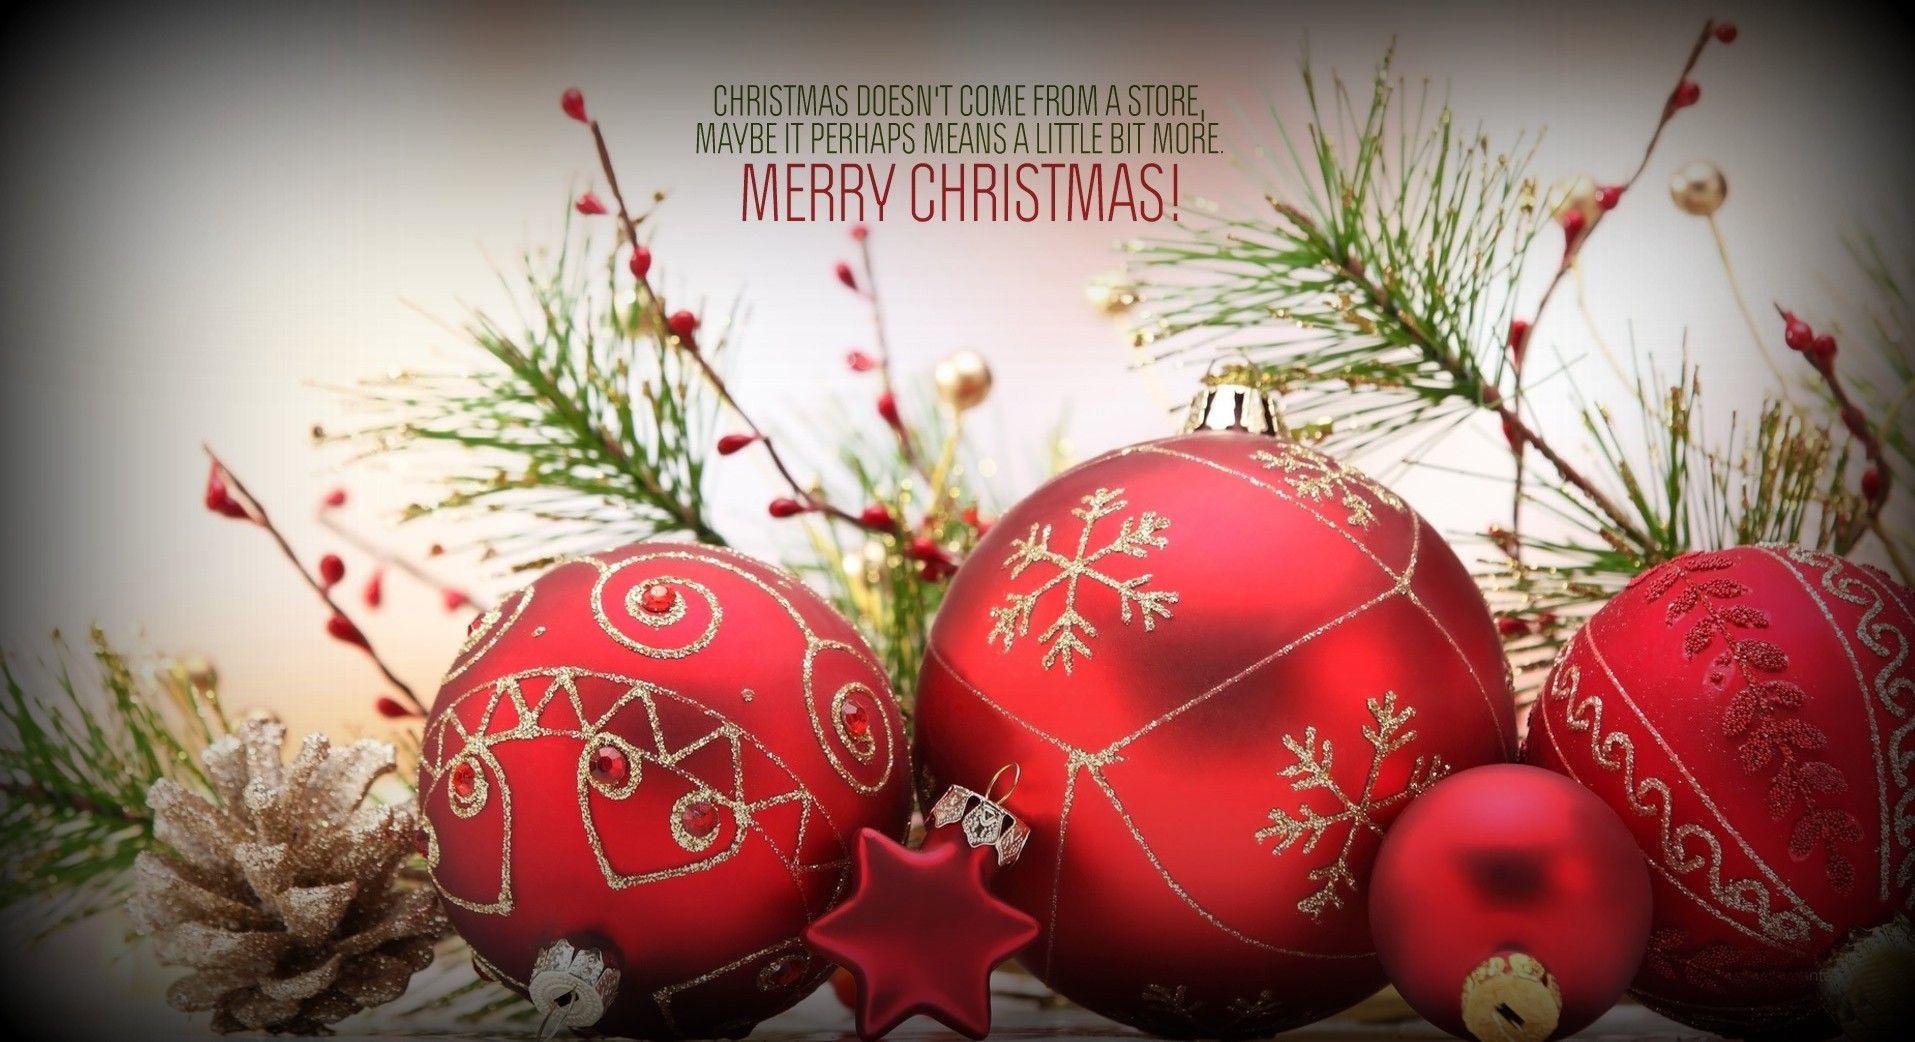 Merry Christmas 2014 Wallpaper, Messages, Quotes, Wishes, Ideas